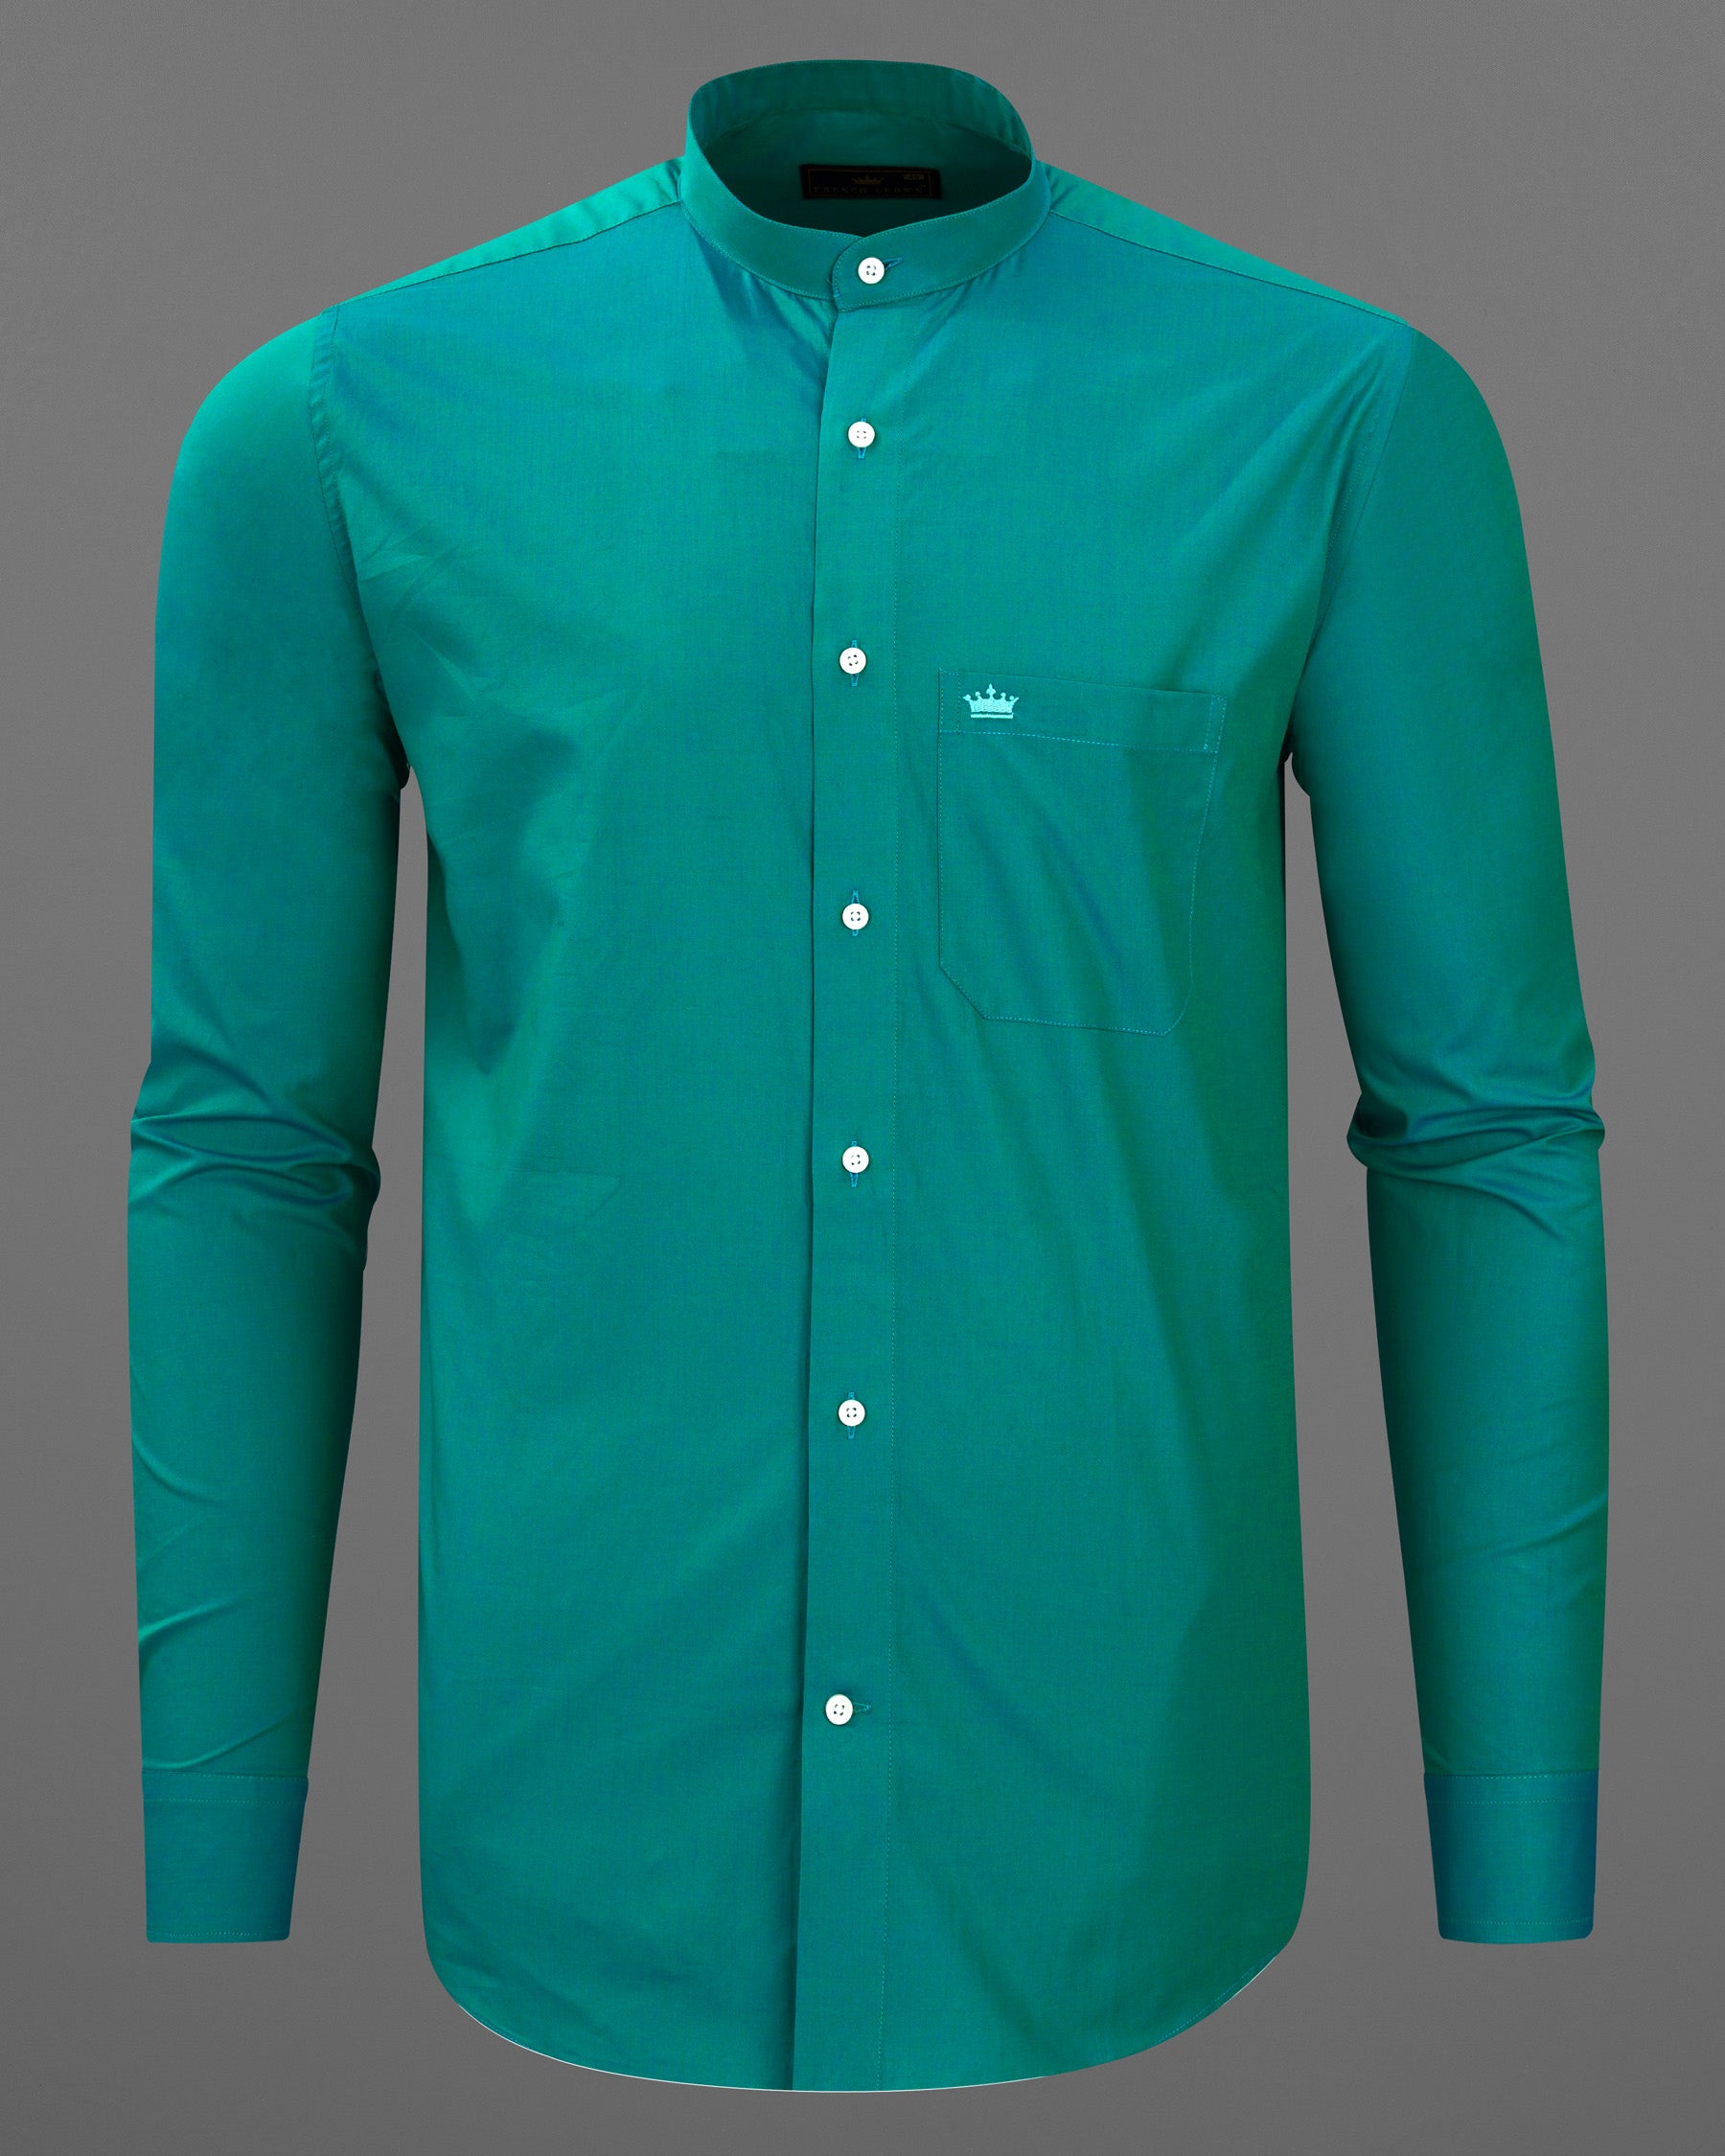 Teal Green Chambray Textured Premium Cotton Shirt 7678-M-38, 7678-M-H-38, 7678-M-39,7678-M-H-39, 7678-M-40, 7678-M-H-40, 7678-M-42, 7678-M-H-42, 7678-M-44, 7678-M-H-44, 7678-M-46, 7678-M-H-46, 7678-M-48, 7678-M-H-48, 7678-M-50, 7678-M-H-50, 7678-M-52, 7678-M-H-52